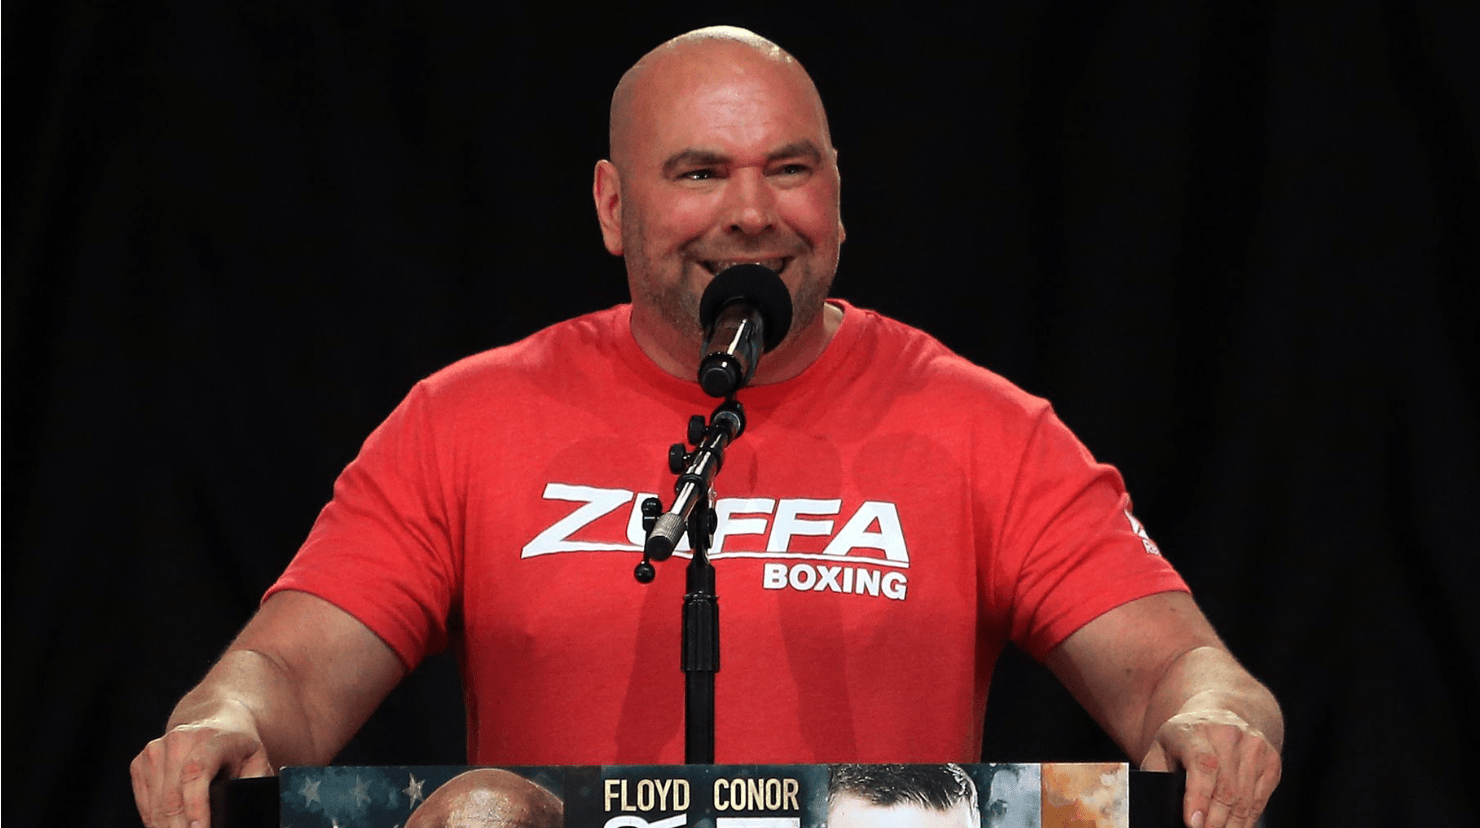 Dana White On Zuffa Boxing: ‘Anything Is Possible’